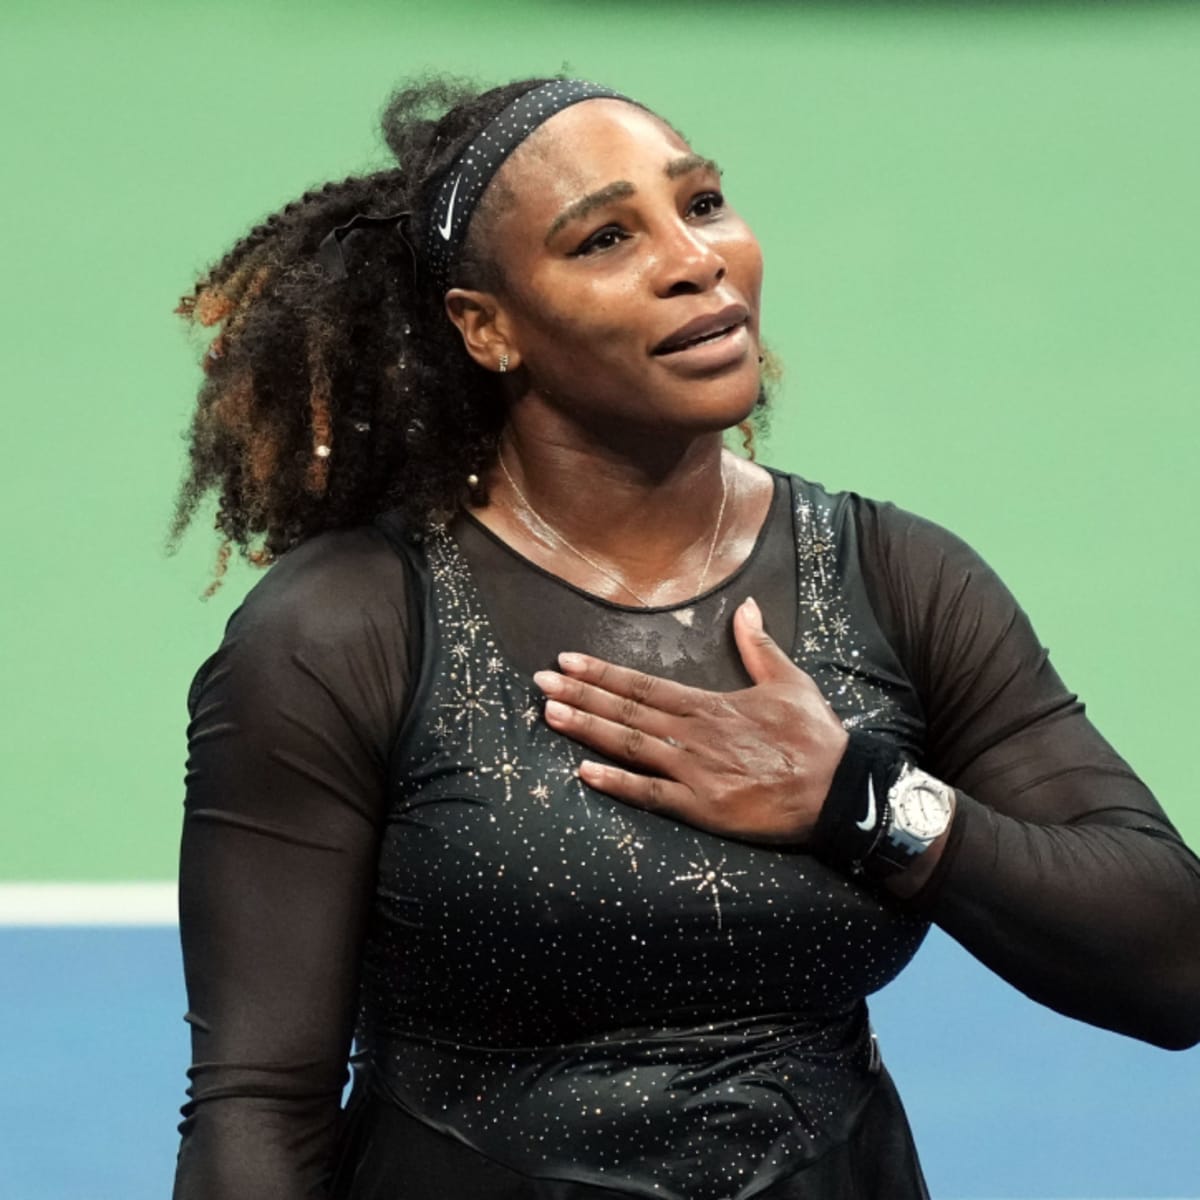 What is the name of Serena Williams' sister who is also a professional tennis player?